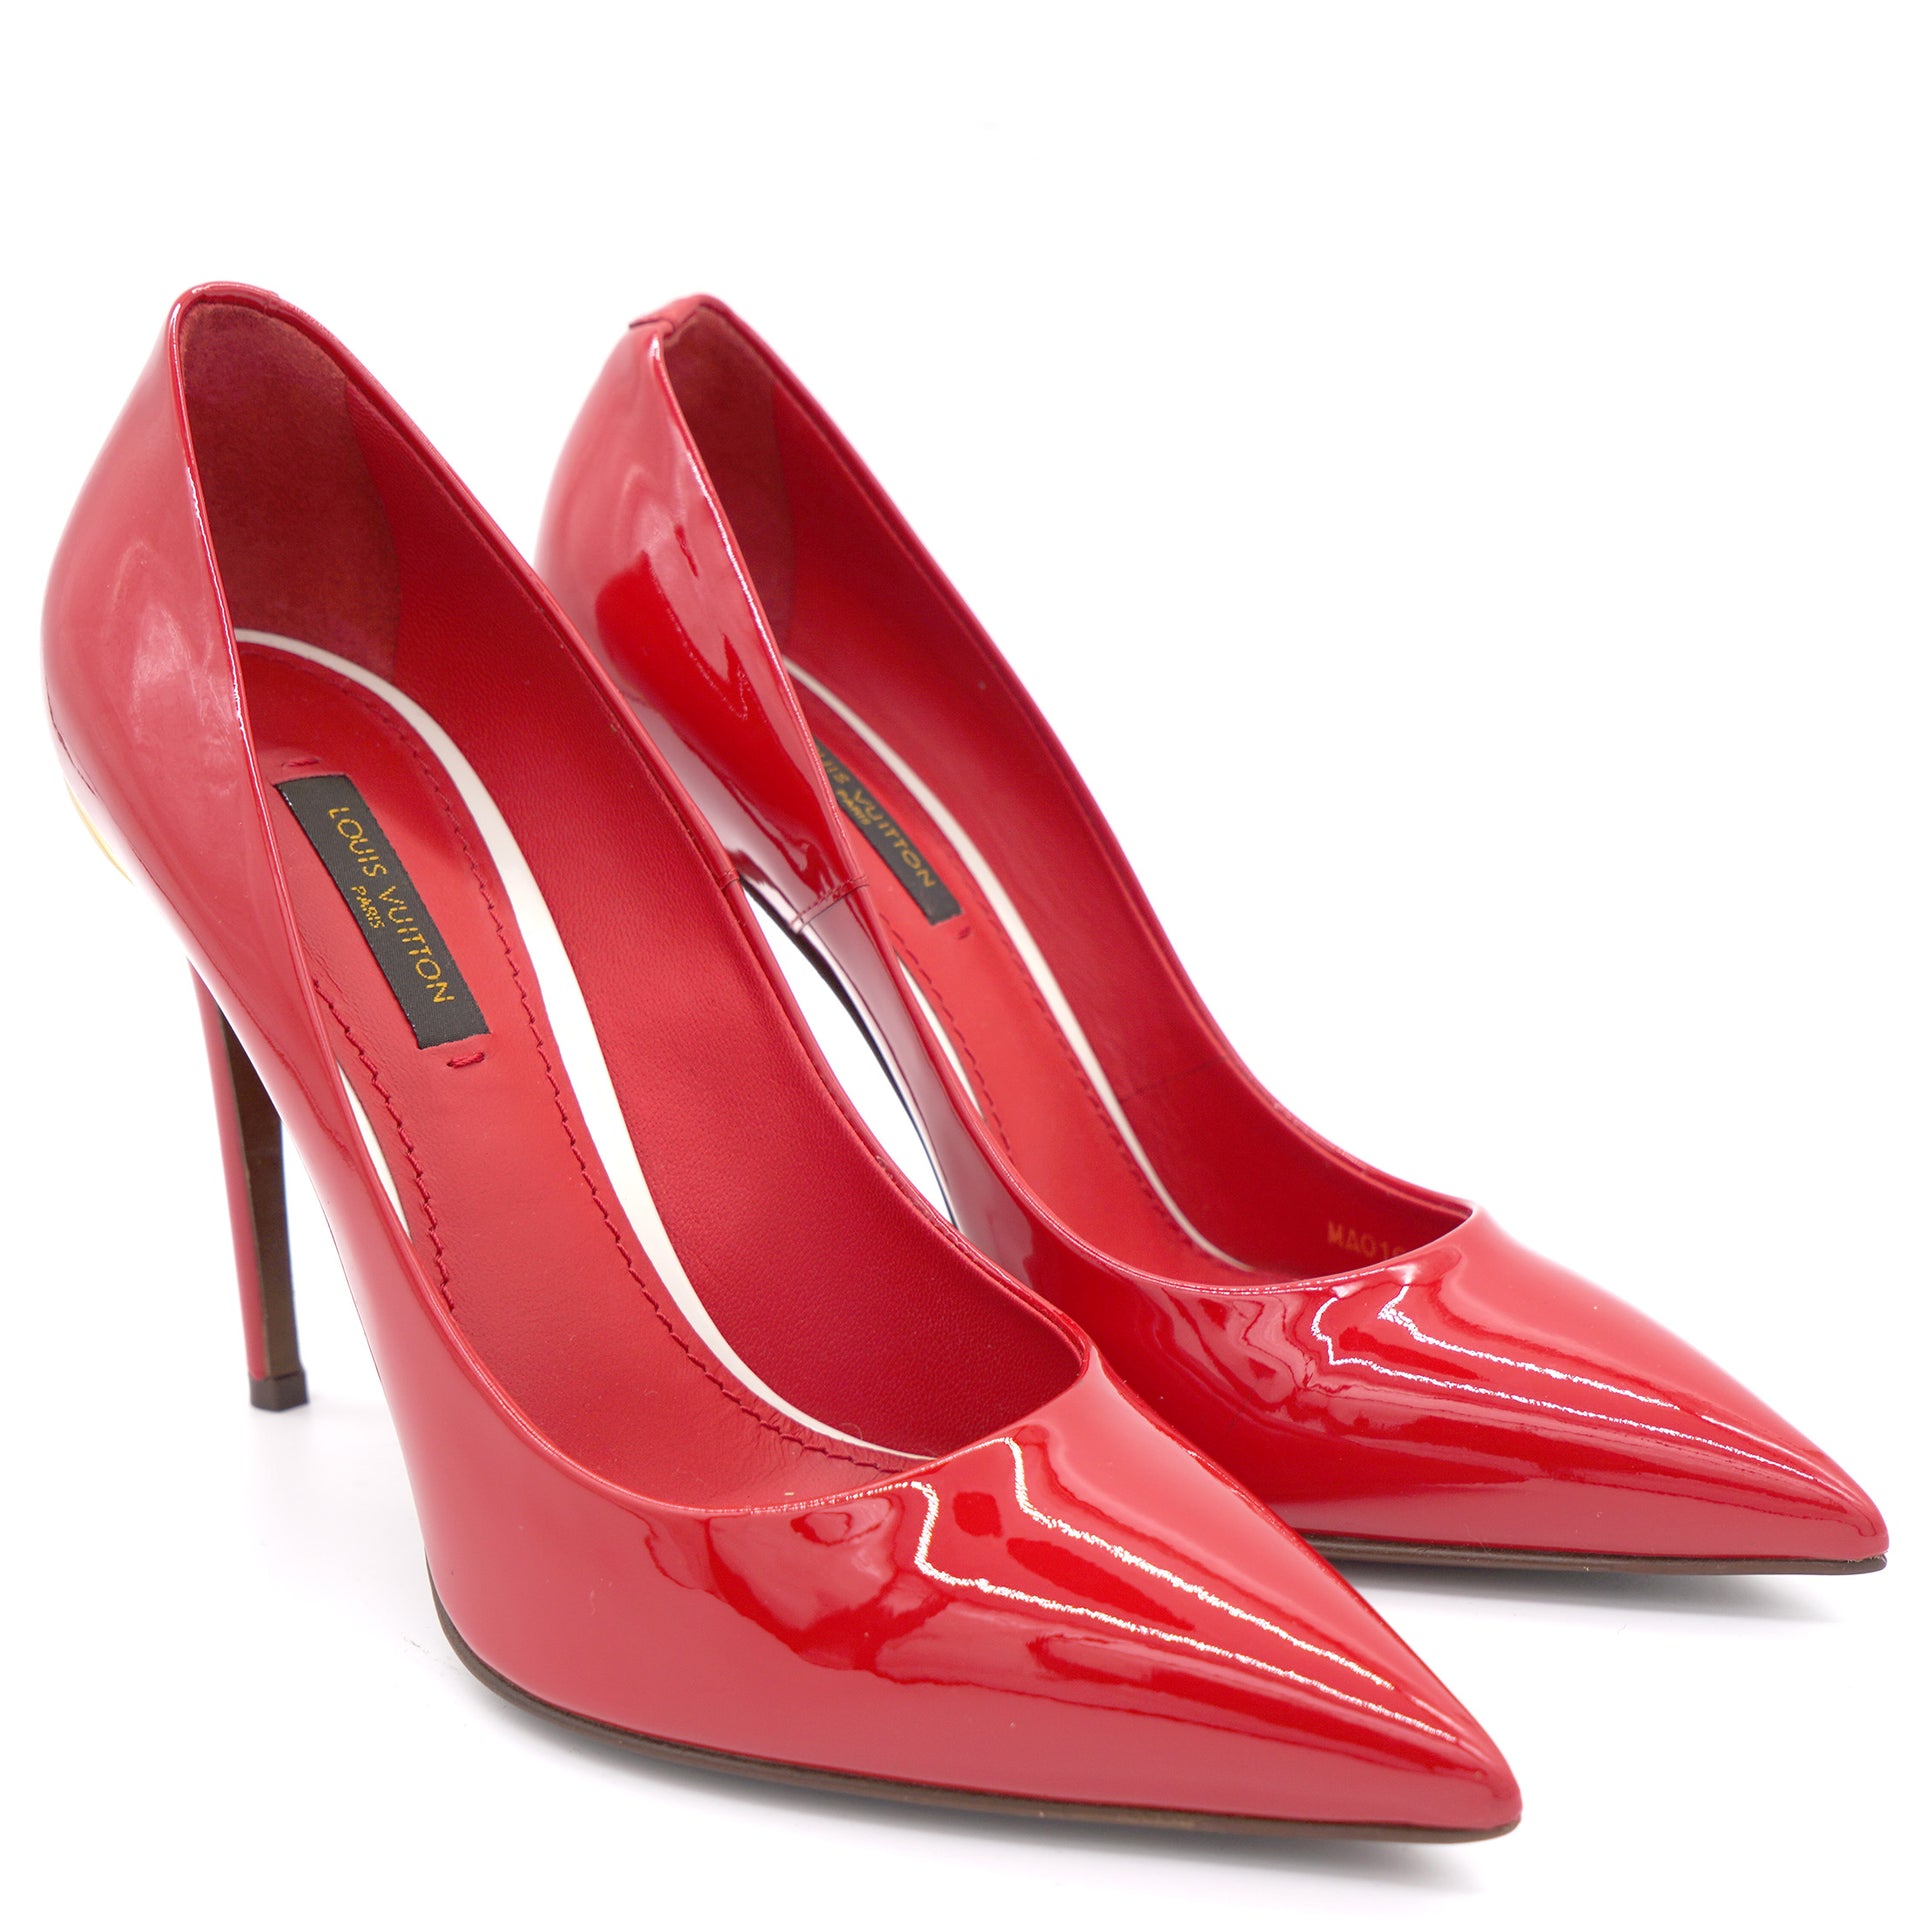 Louis Vuitton - Authenticated Heel - Patent Leather Red for Women, Very Good Condition